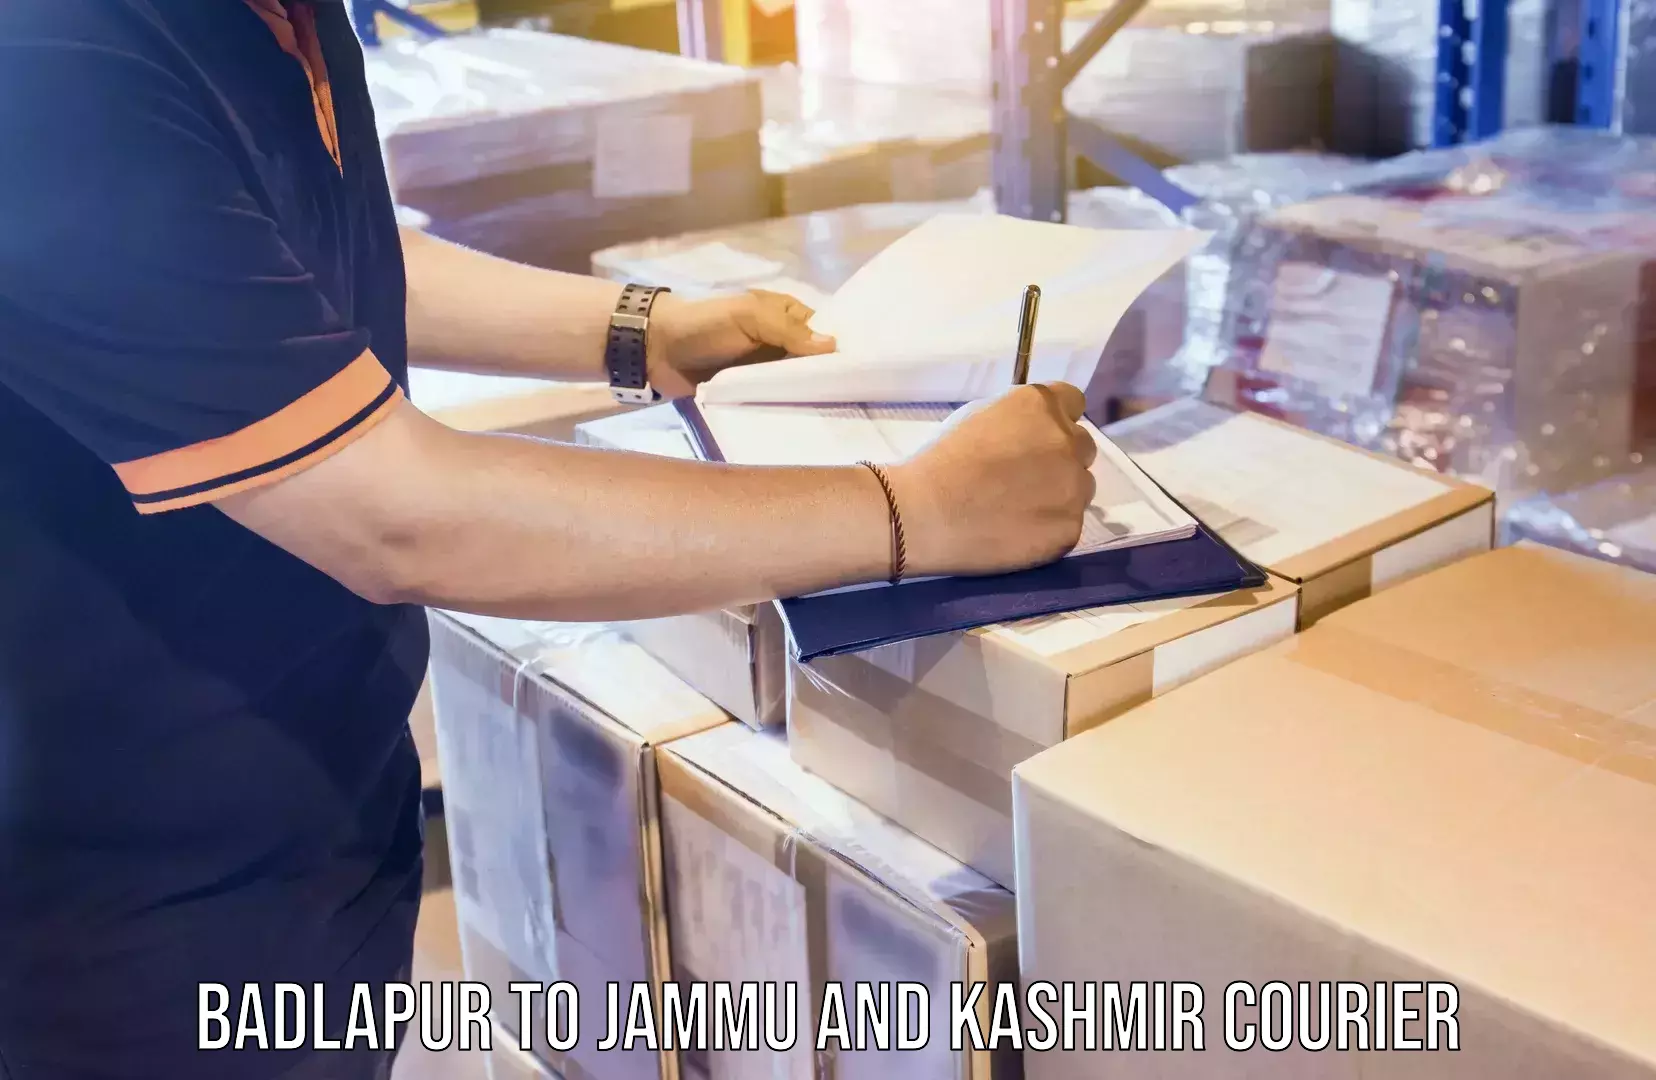 Local delivery service Badlapur to Jammu and Kashmir